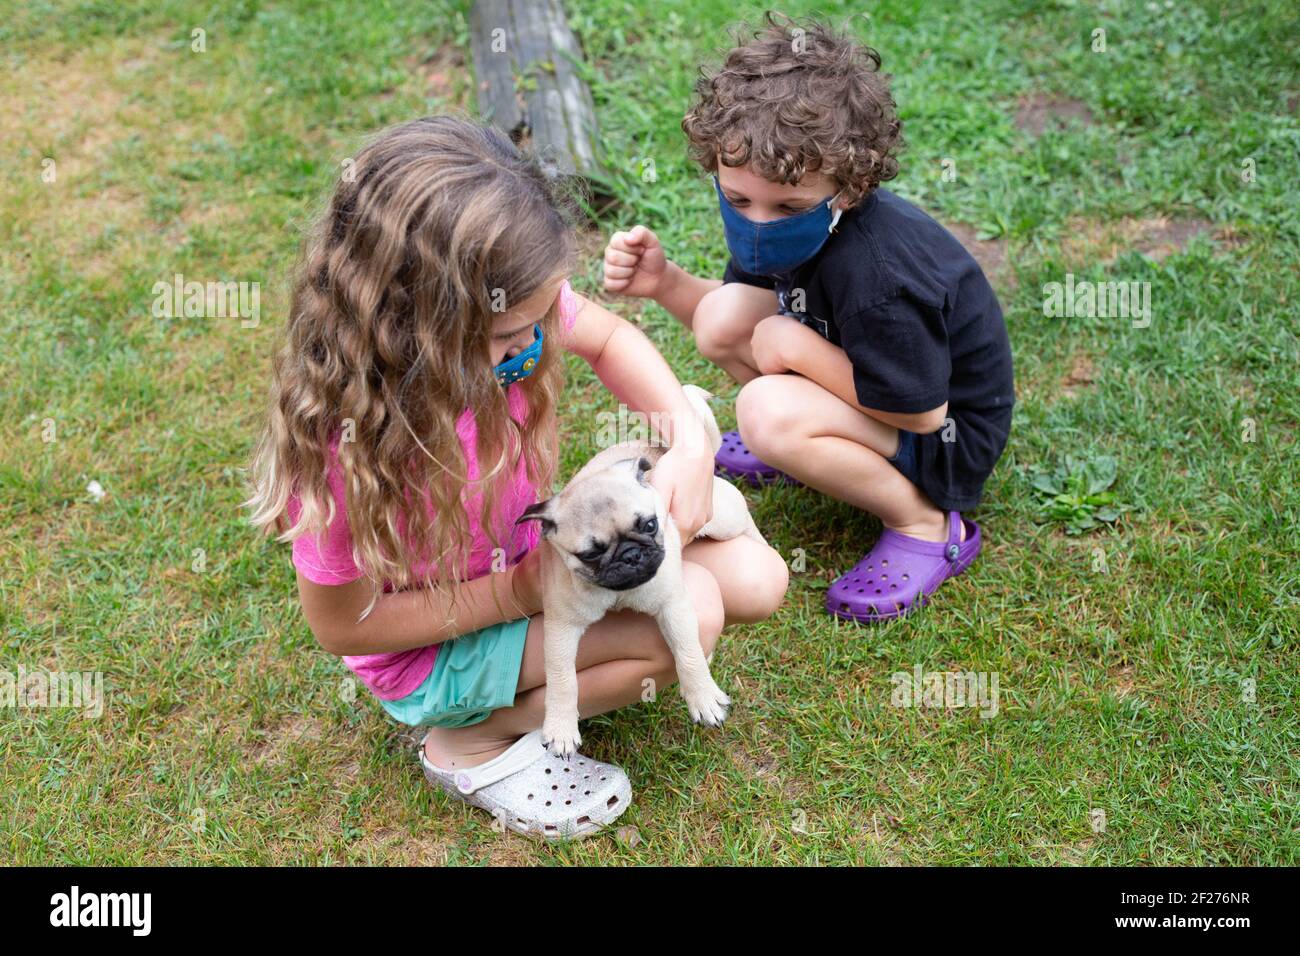 Two children playing with pug puppy outside Stock Photo